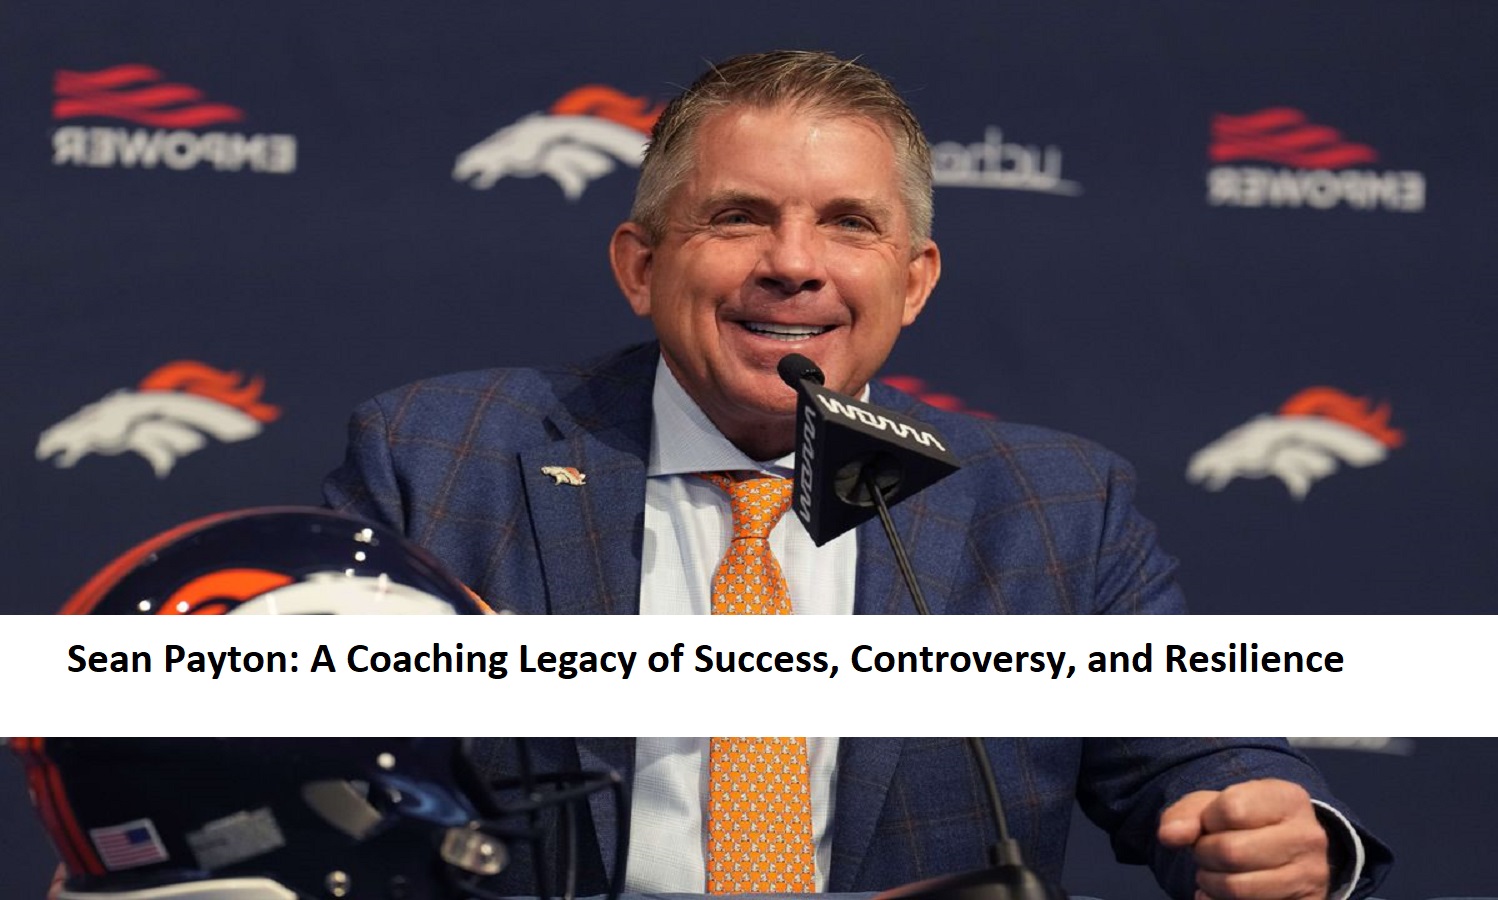 Sean Payton: A Coaching Legacy of Success, Controversy, and Resilience